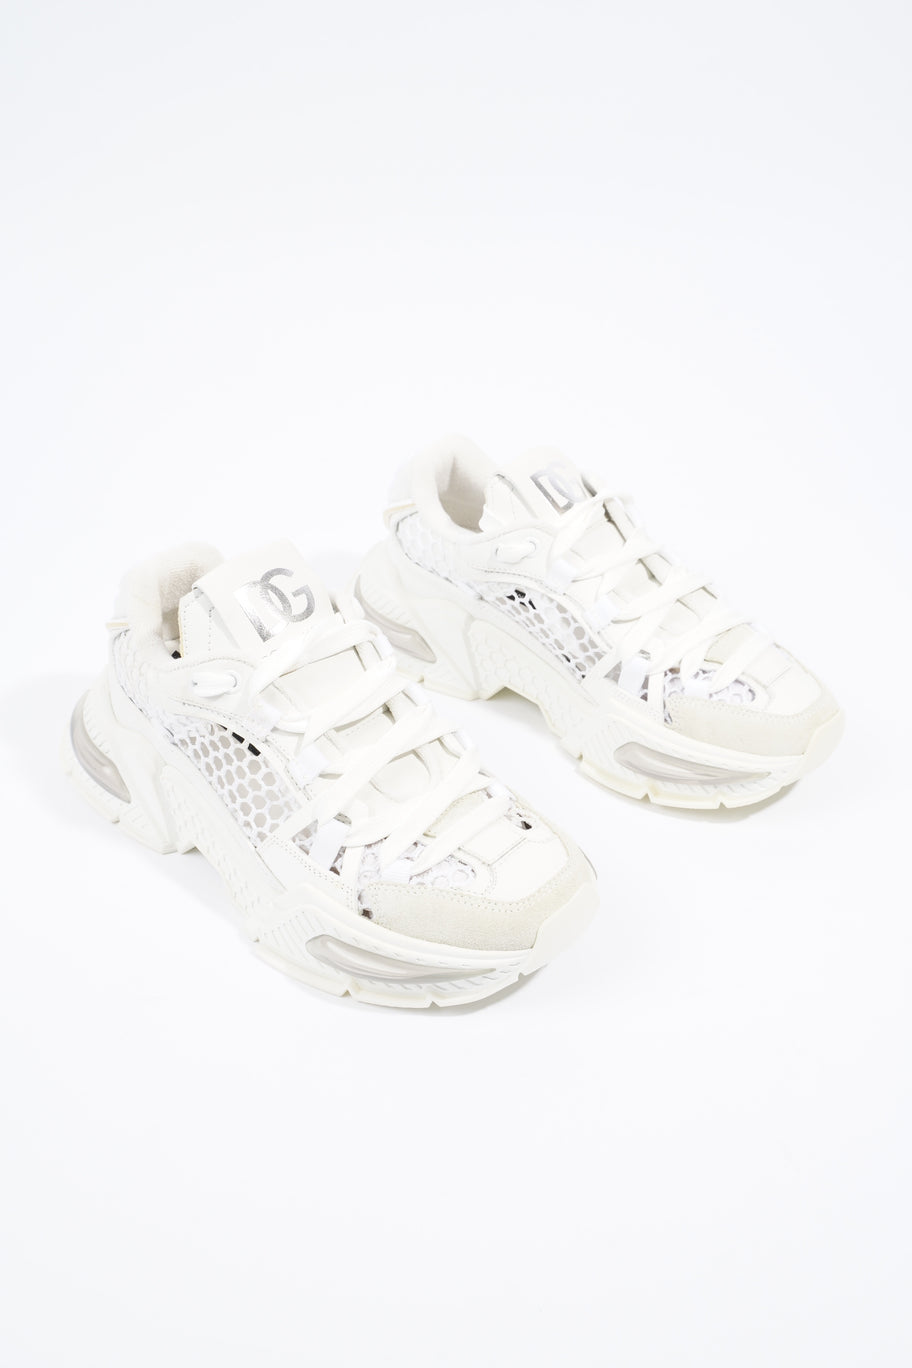 Airmaster Sneakers White Leather EU 37.5 UK 4.5 Image 2